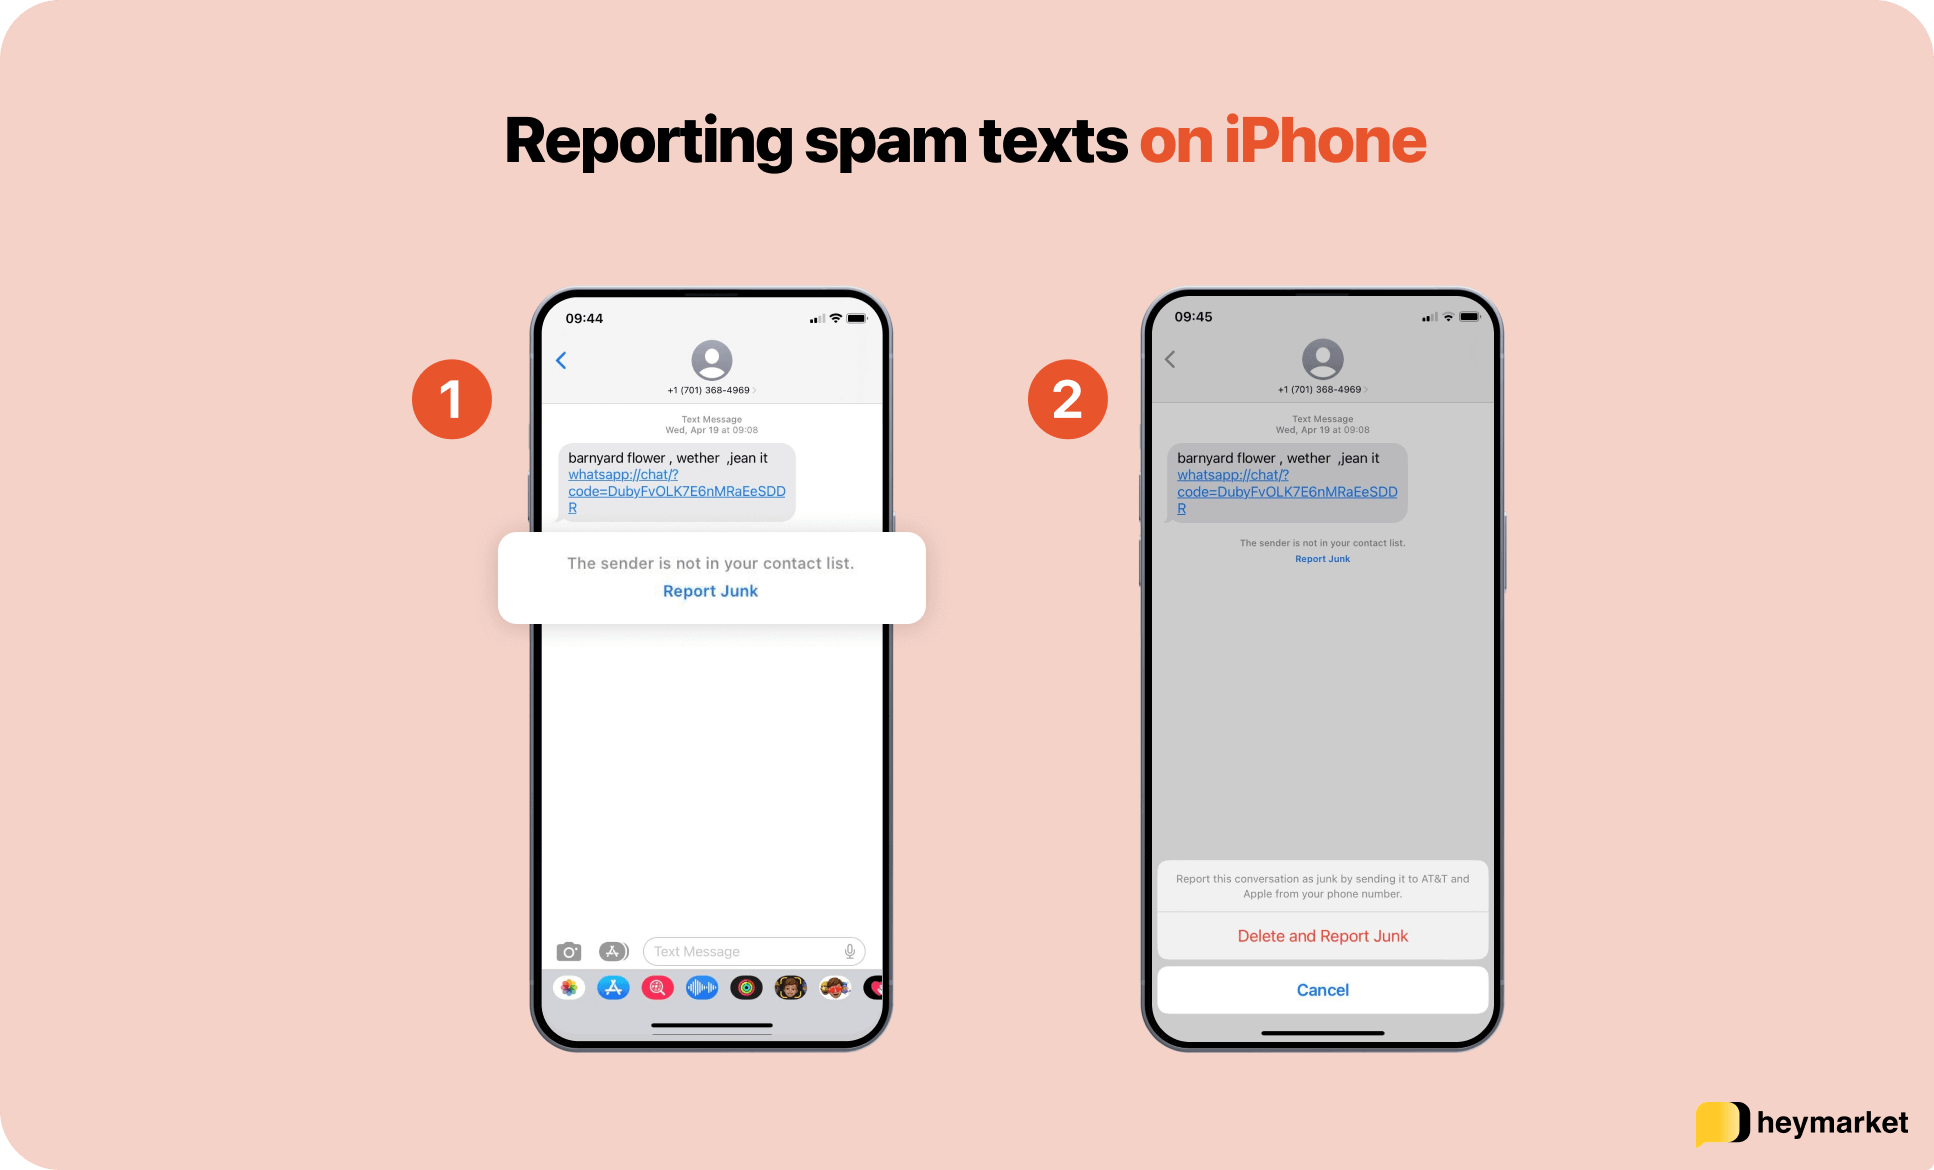 Steps for reporting spam texts using an iPhone